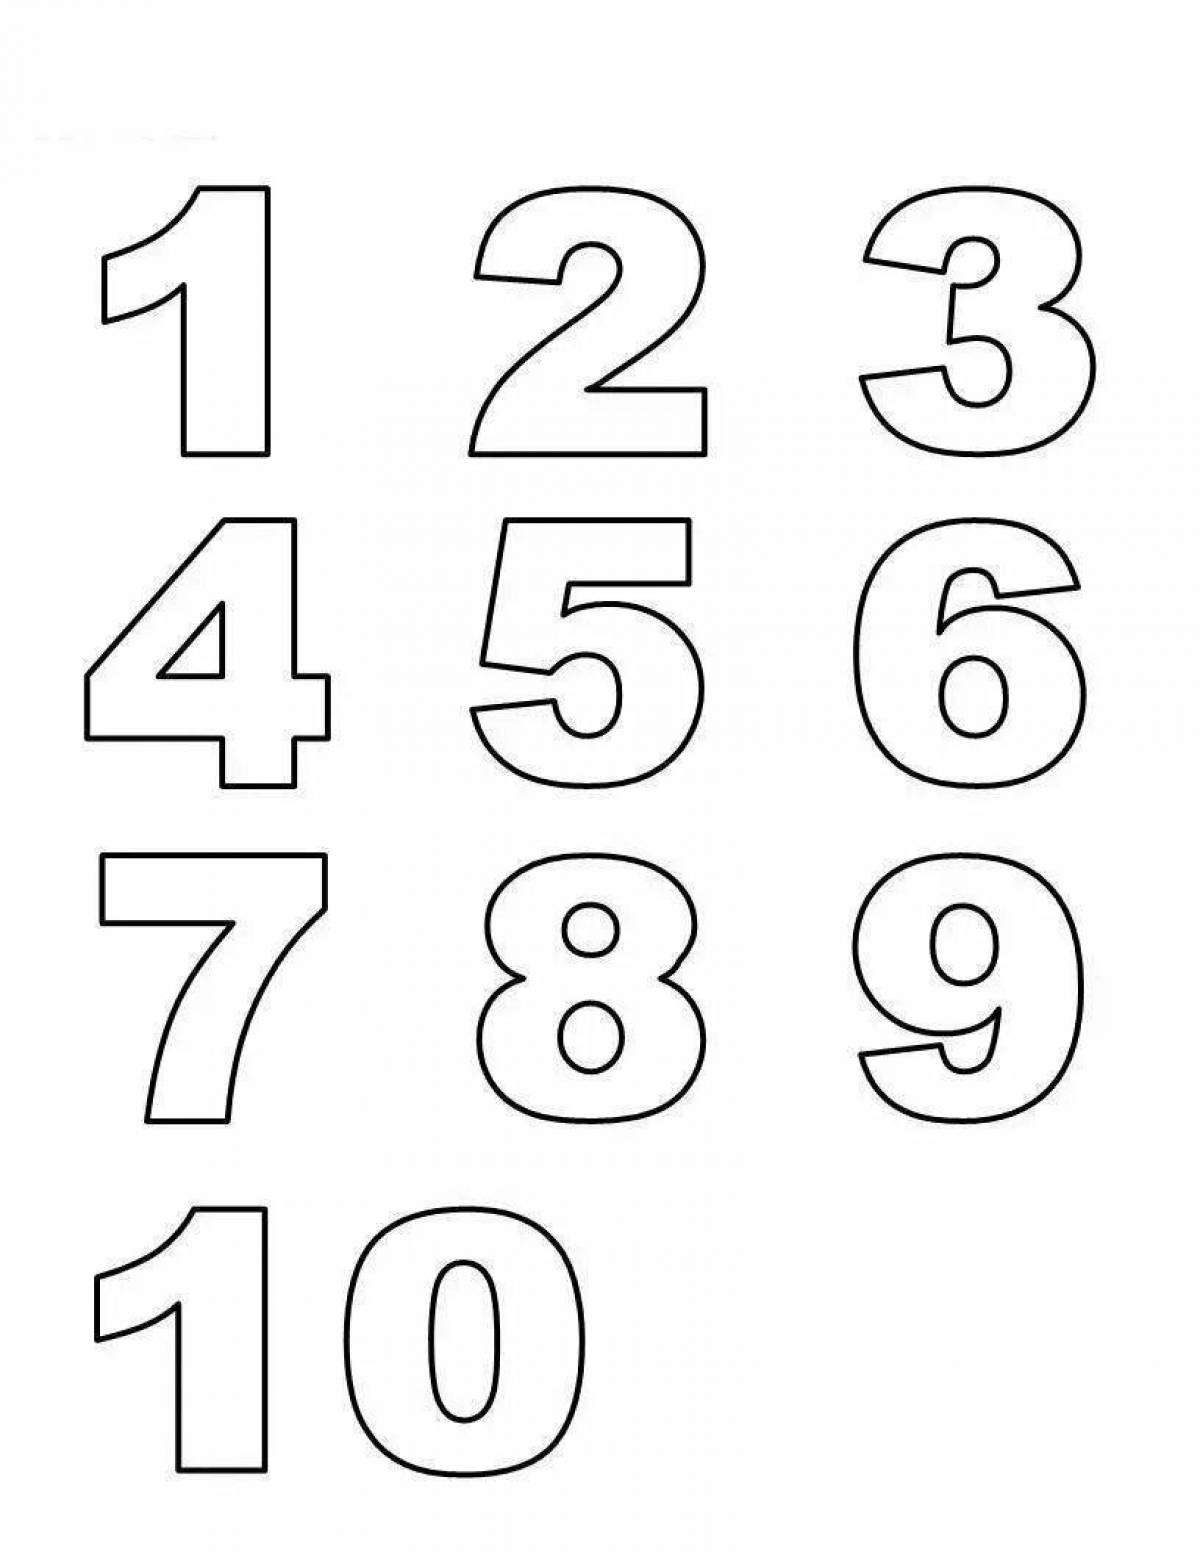 Coloring pages with numbers from 1 to 10 for children